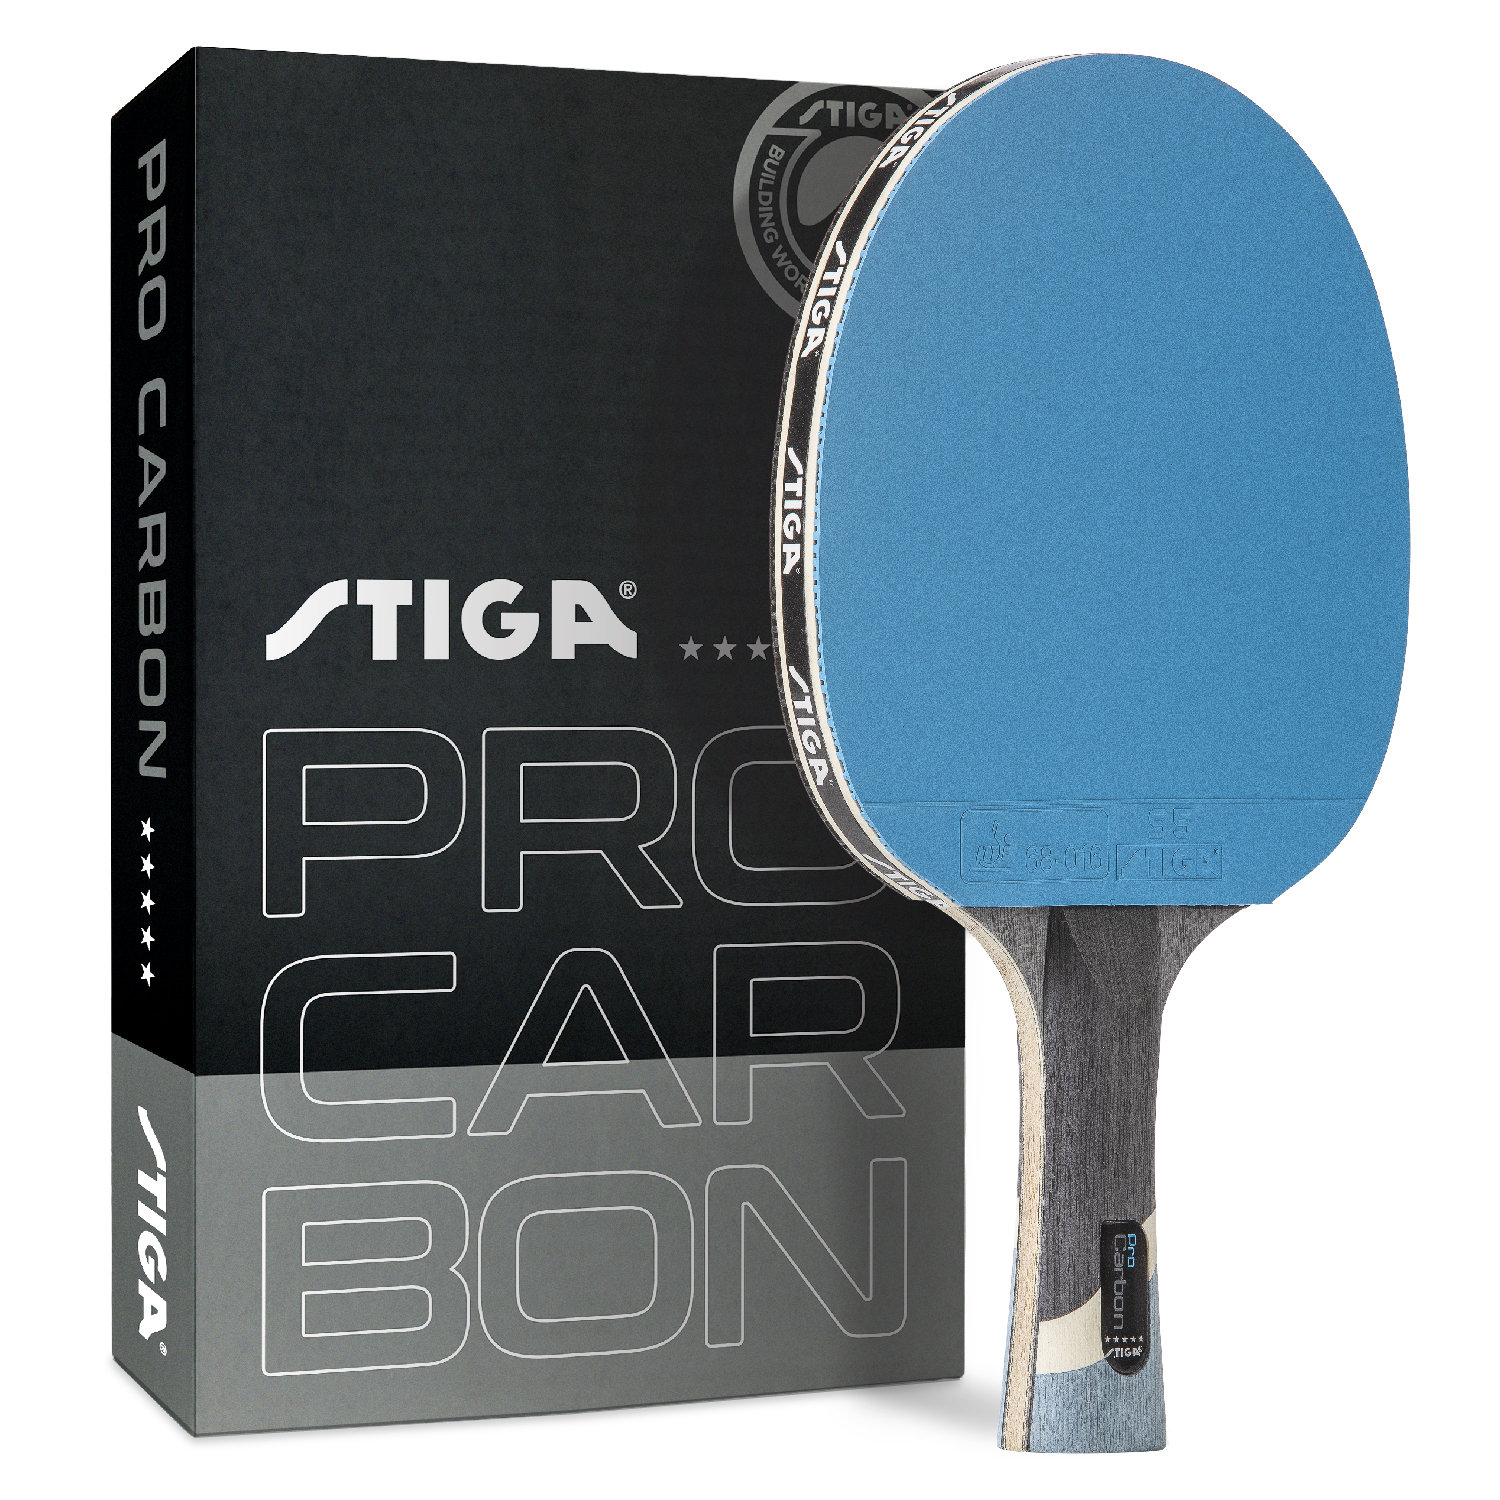 STIGA Performance 4 Player Ping Pong Paddle Set of 4 – Table Tennis  Rackets, 6 – 3 Star Orange and White Balls